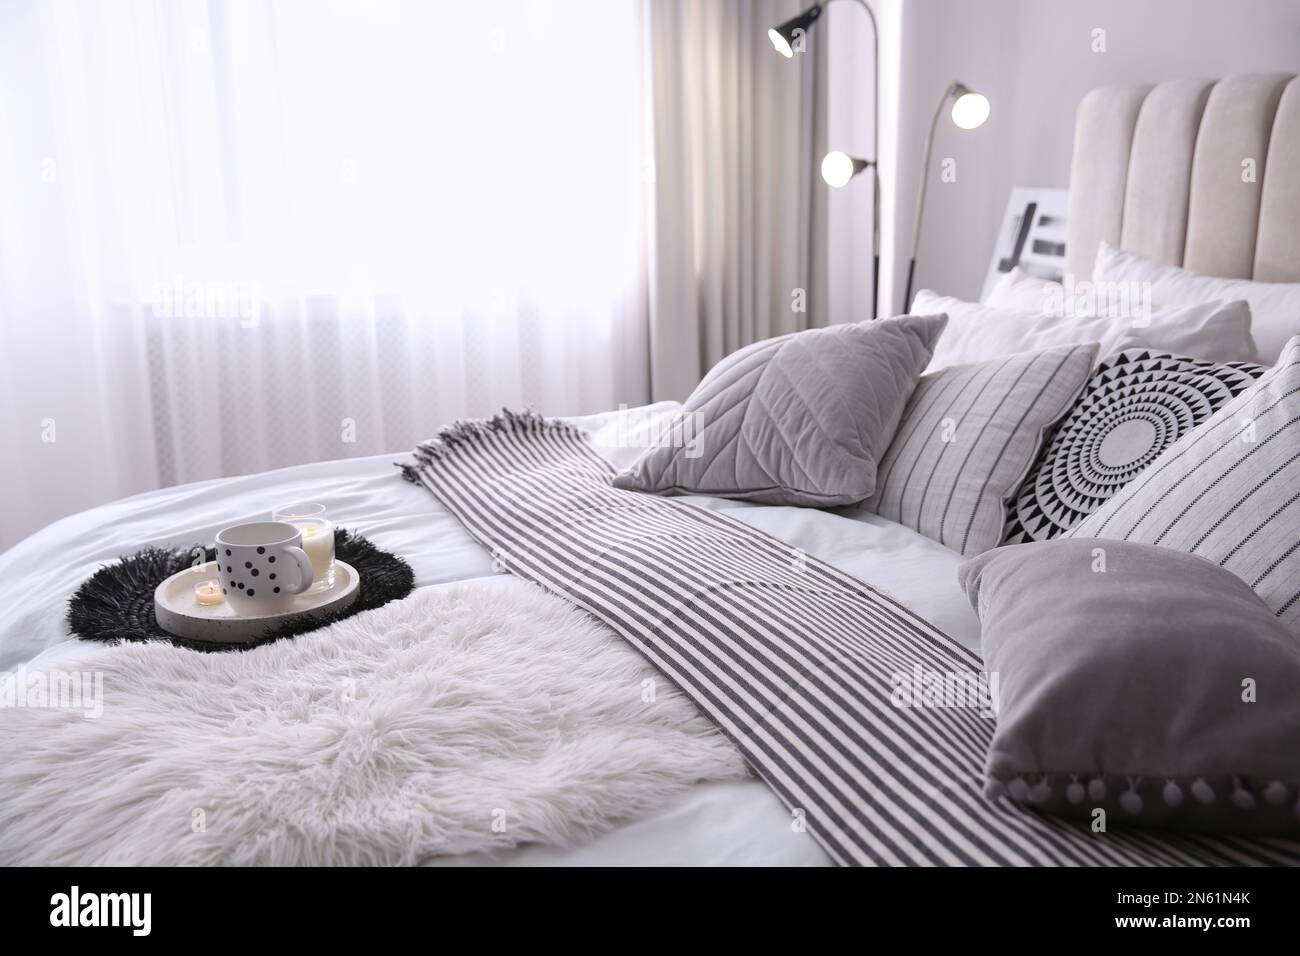 Bed with cushions and striped blanket in room. Interior design Stock Photo